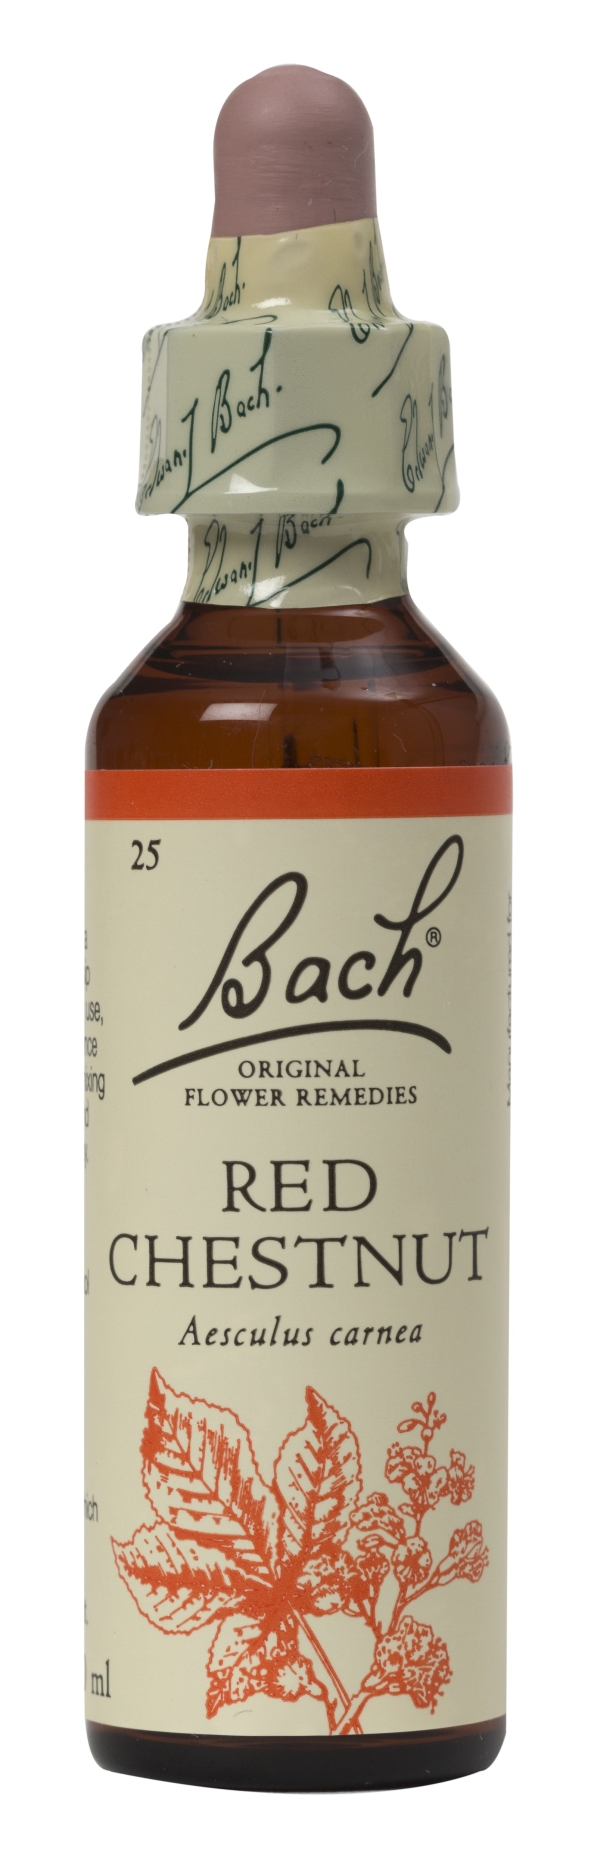 Nelson Bach Flower Remedies: Bach Red Chestnut Flower Remedy (20ml) available online here